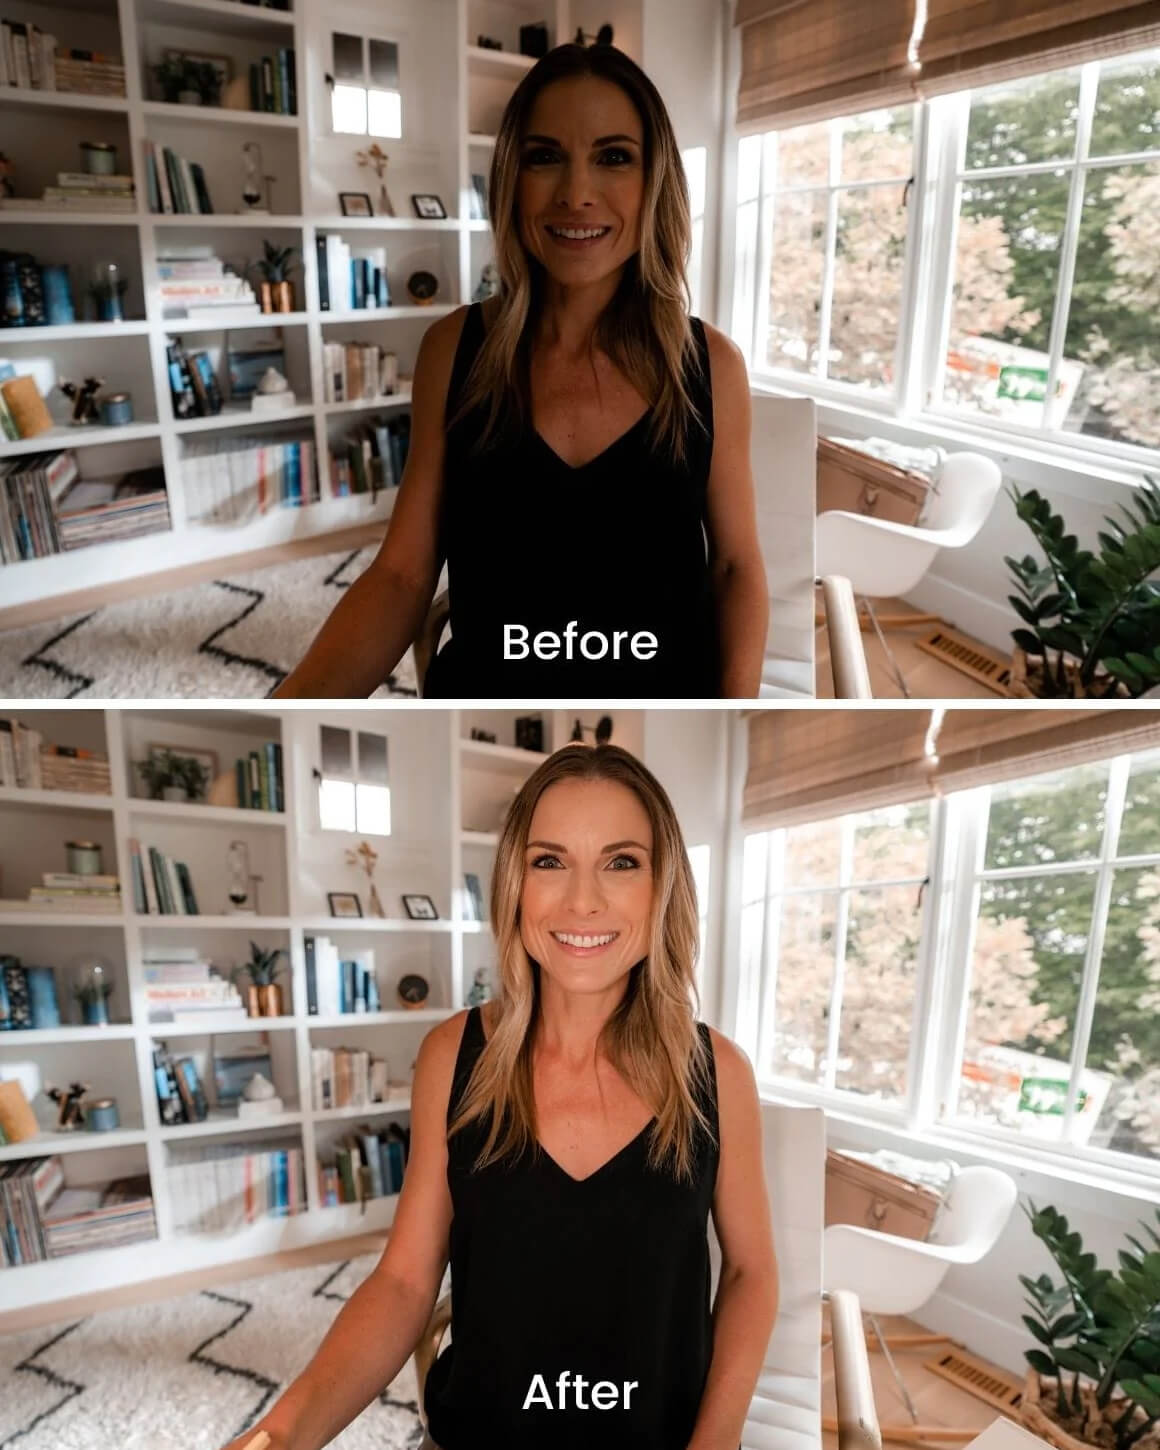 Stacked comparison of woman's appearance with and without lighting from Lume Cube's Video Conference Lighting Kit.